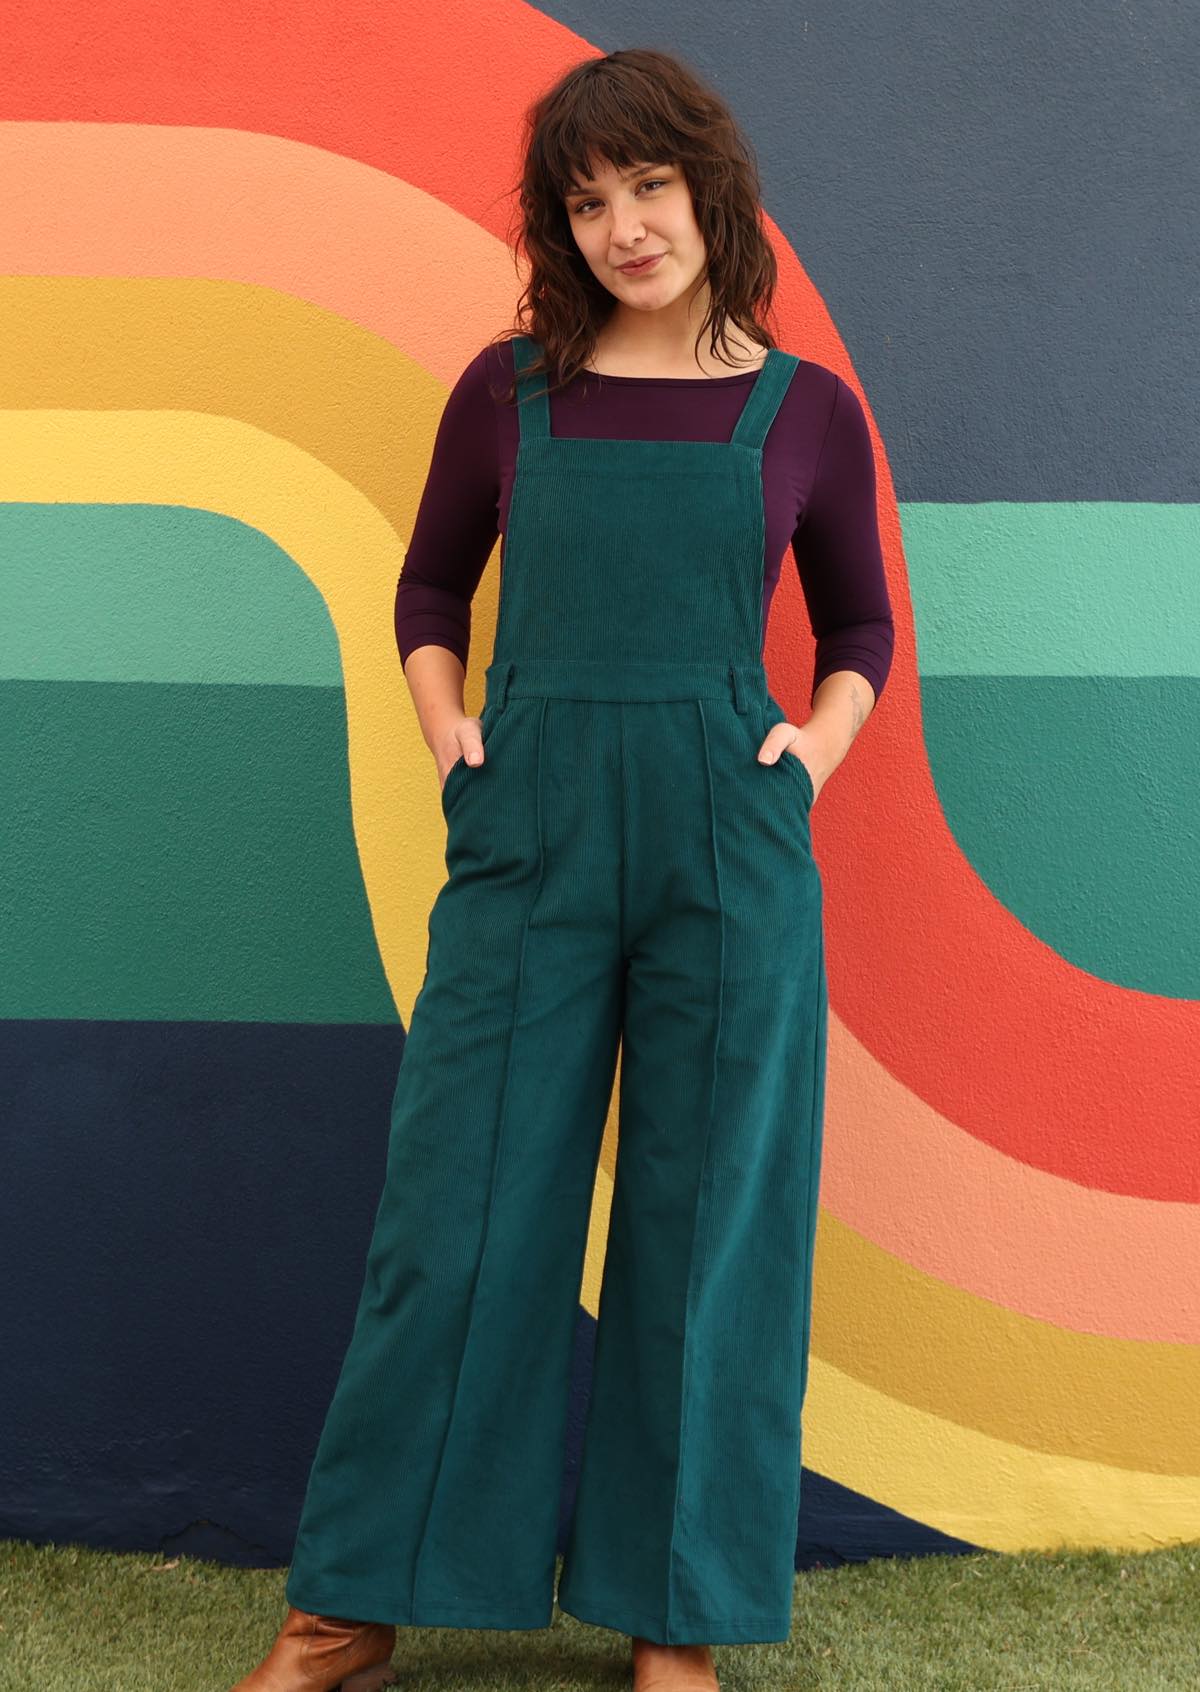 woman wearing dark teal cotton corduroy overalls over long sleeve purple top in front of bright mural wall